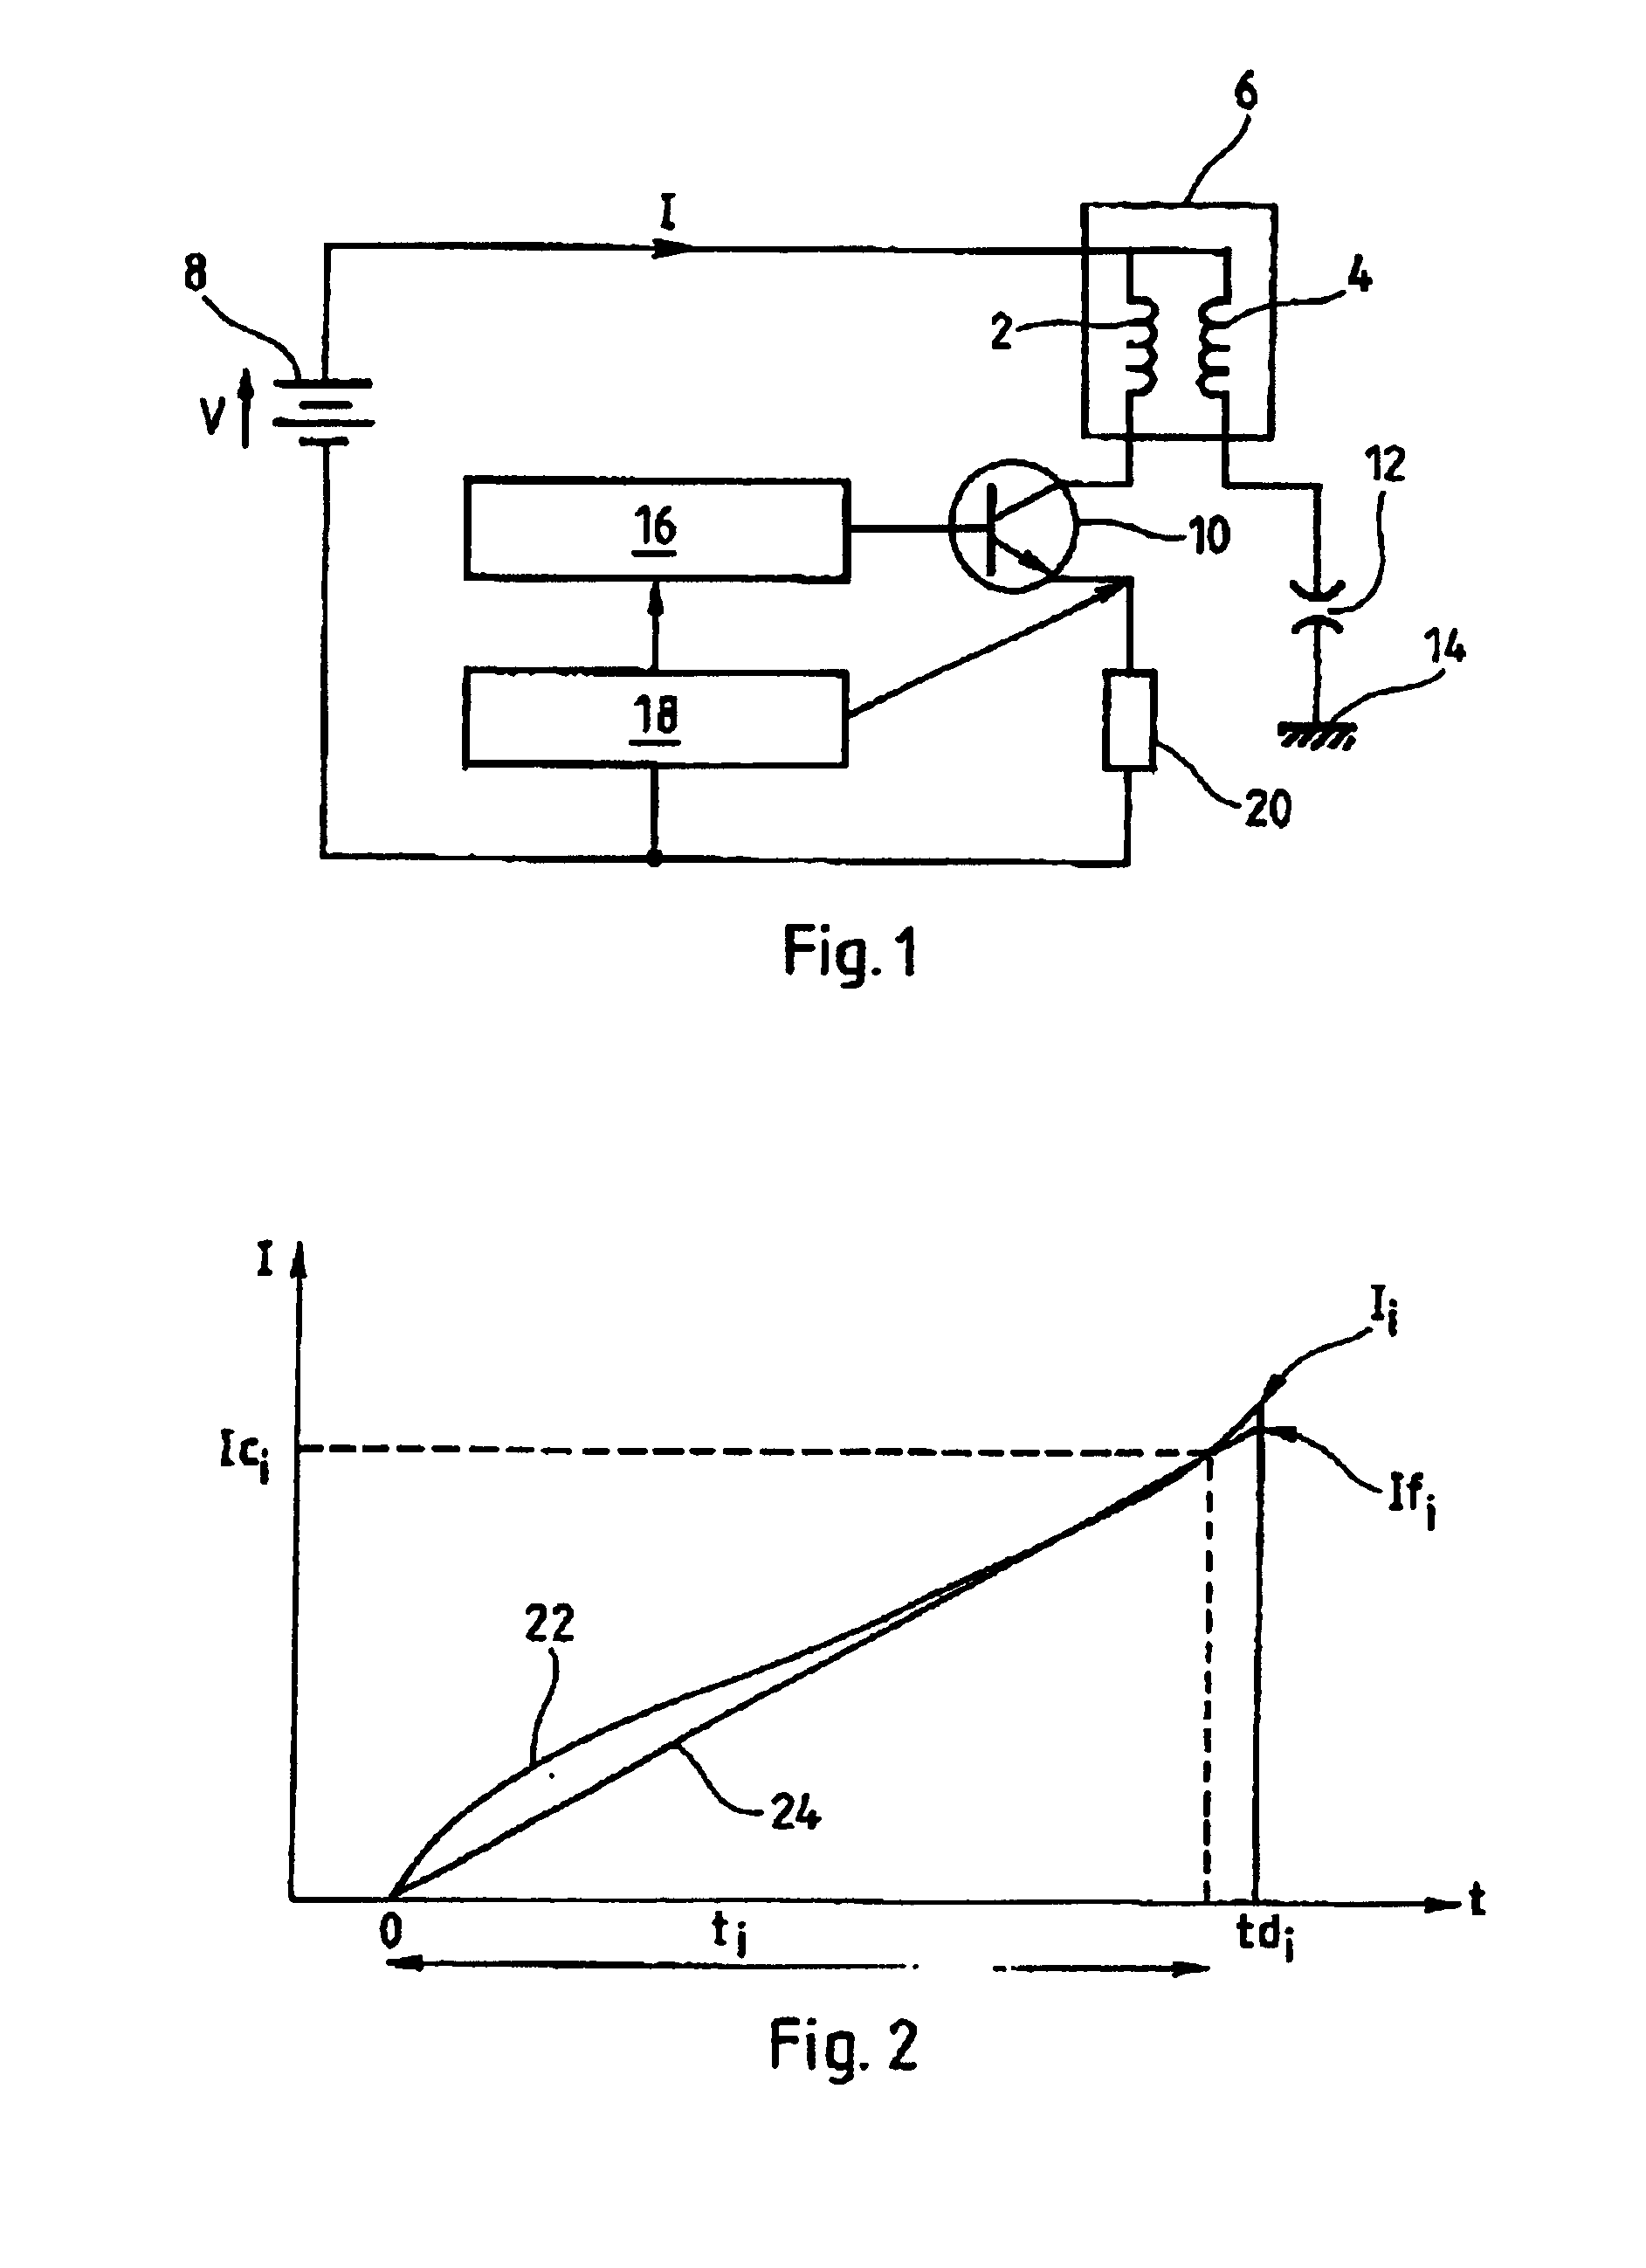 Method for controlling the primary ignition current of an internal combustion engine with controlled ignition